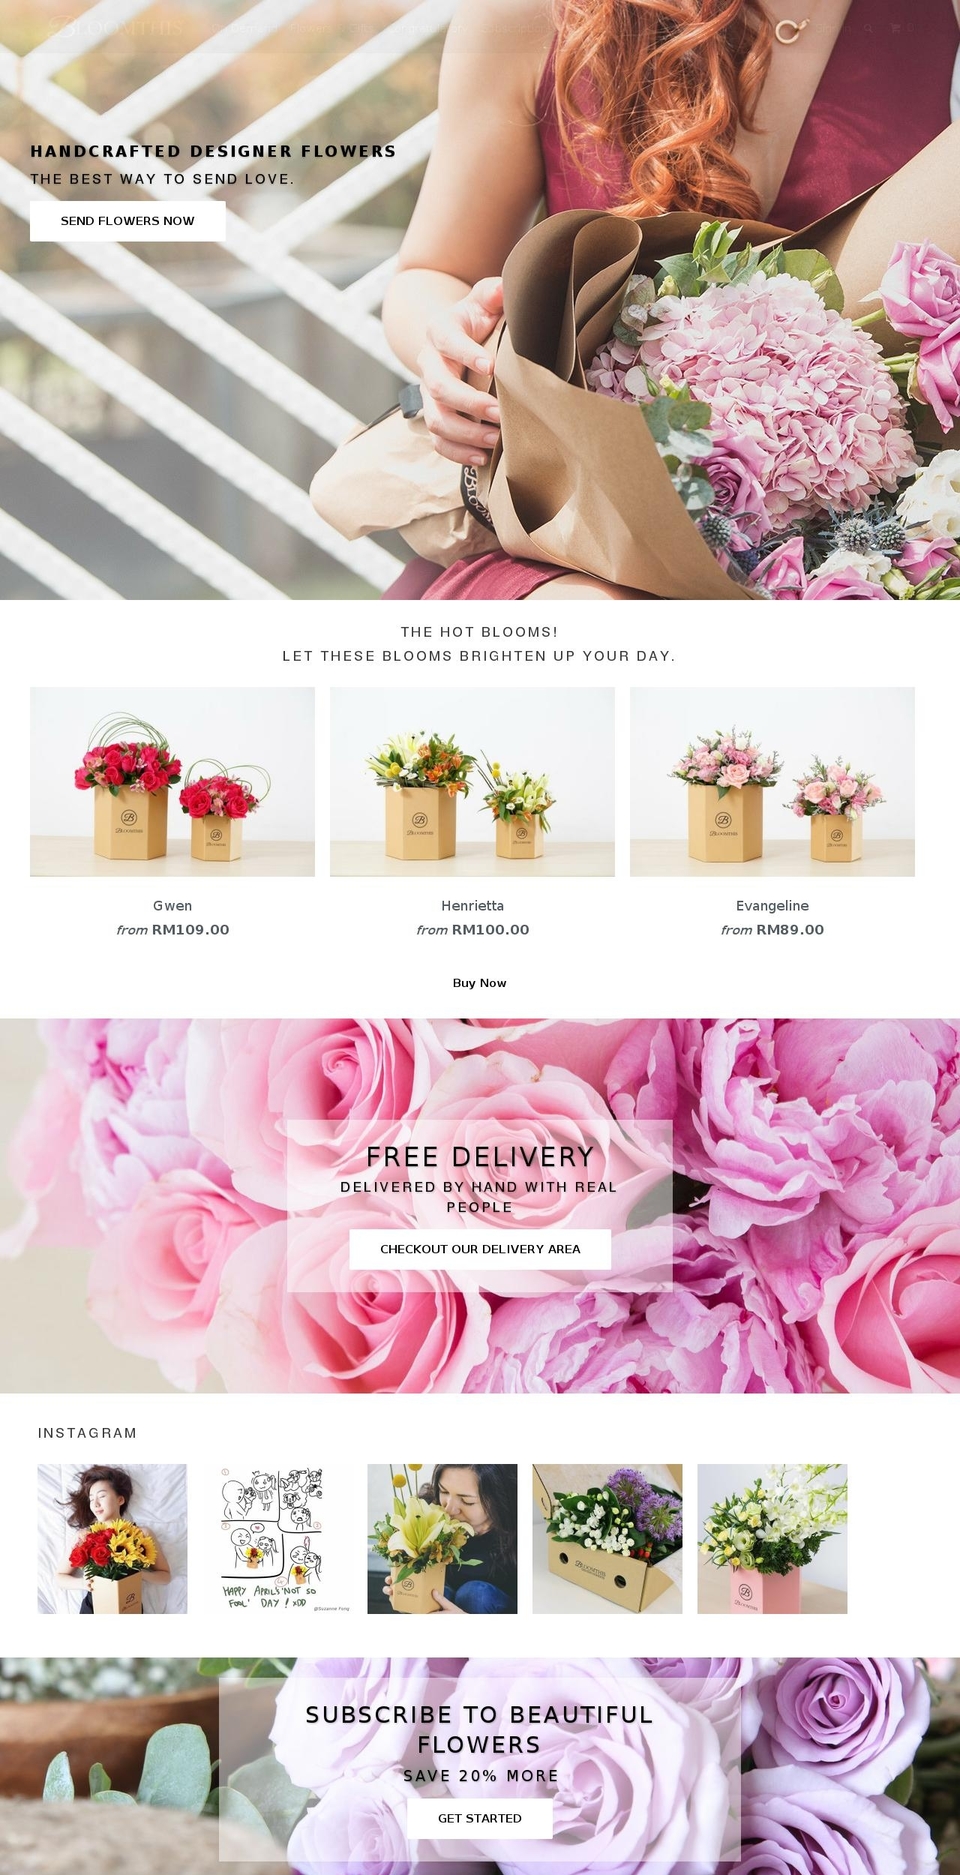 bloomthis.co shopify website screenshot